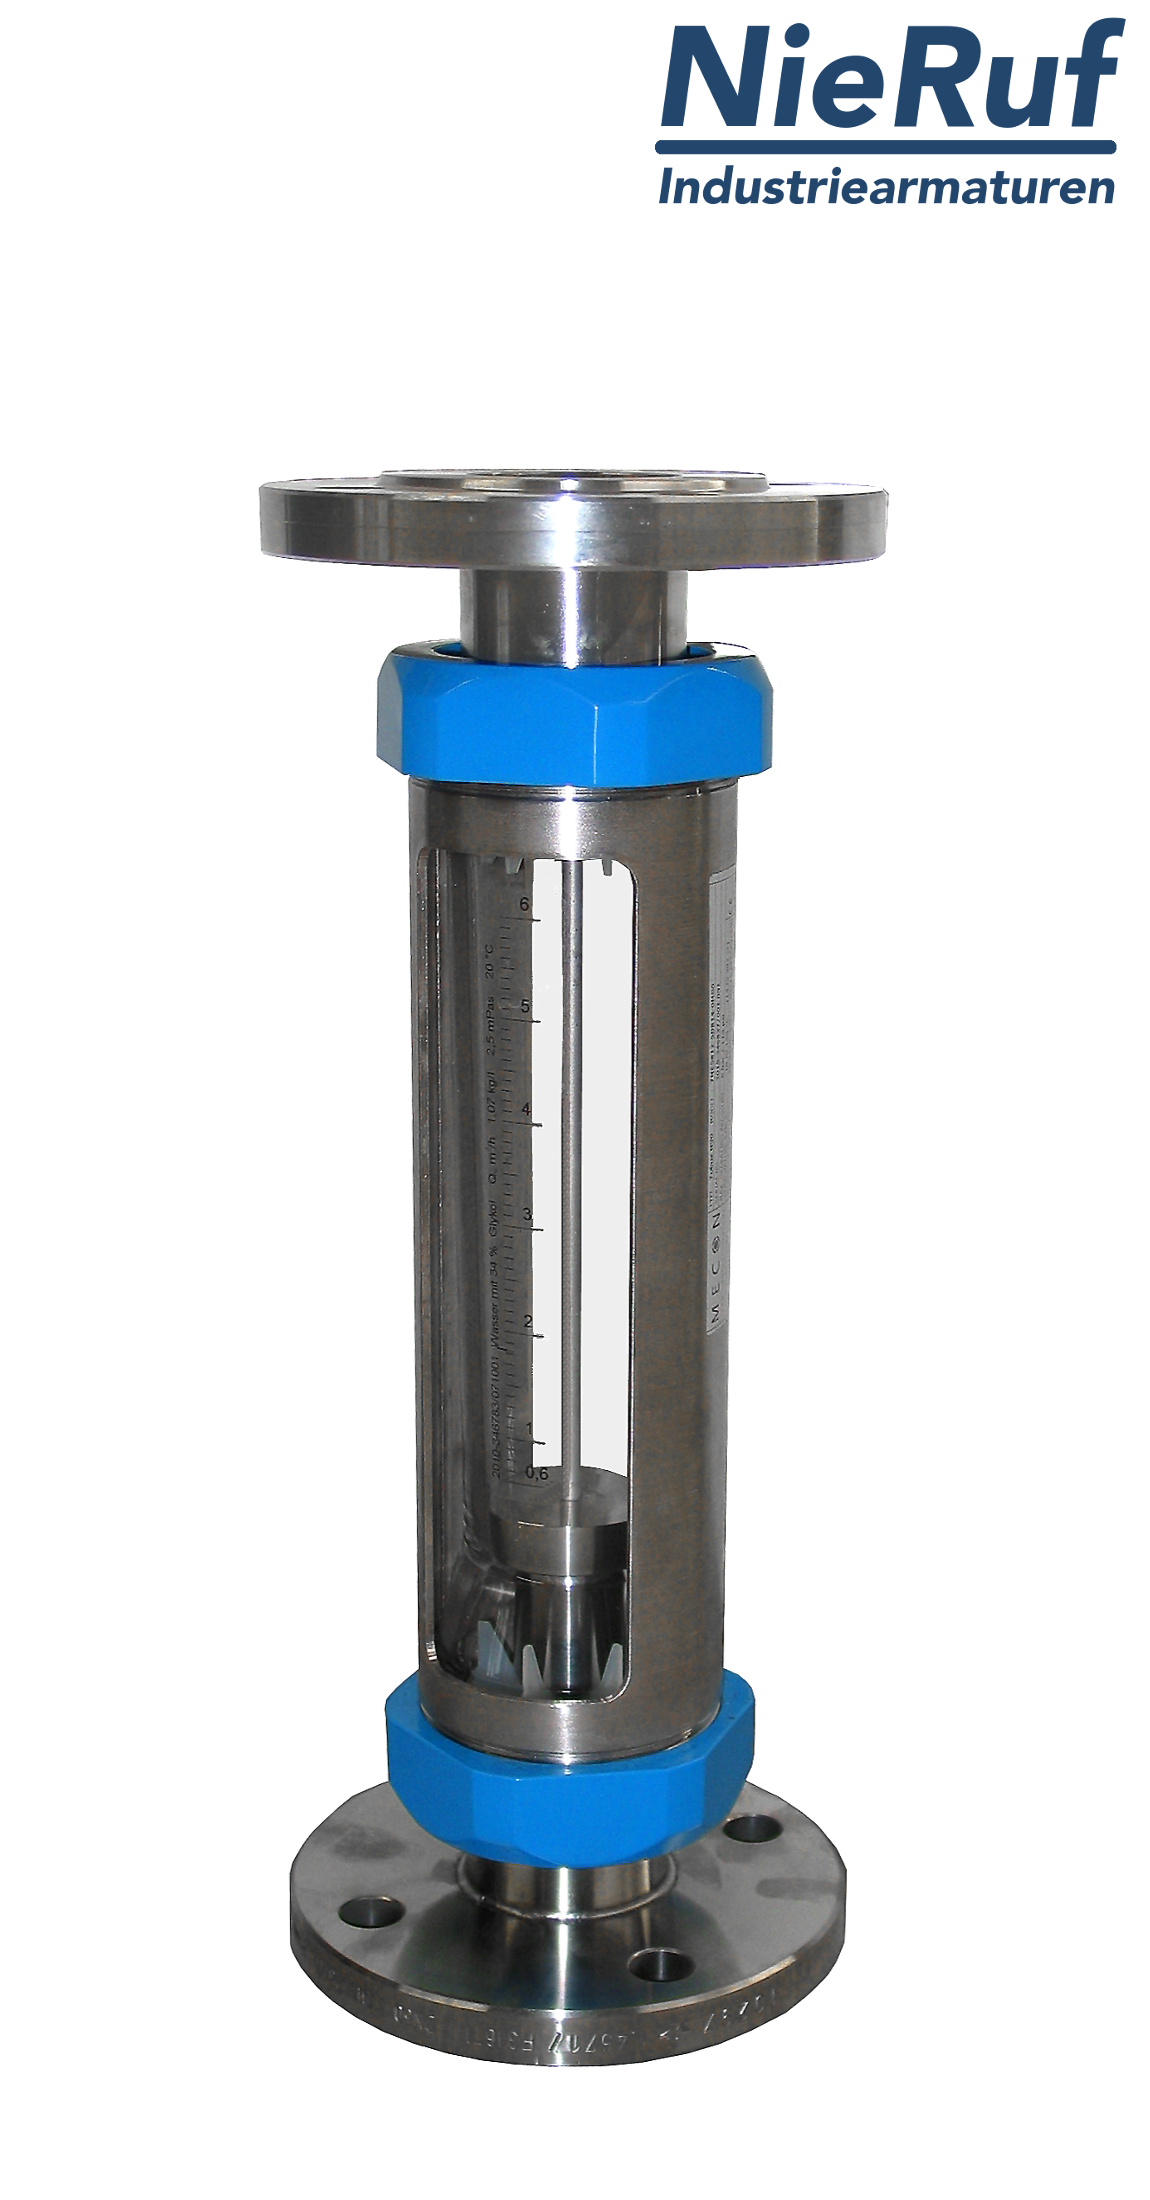 Variable area flowmeter stainless steel + borosilicate flange DN50 160.0 - 1600 l/h water FKM